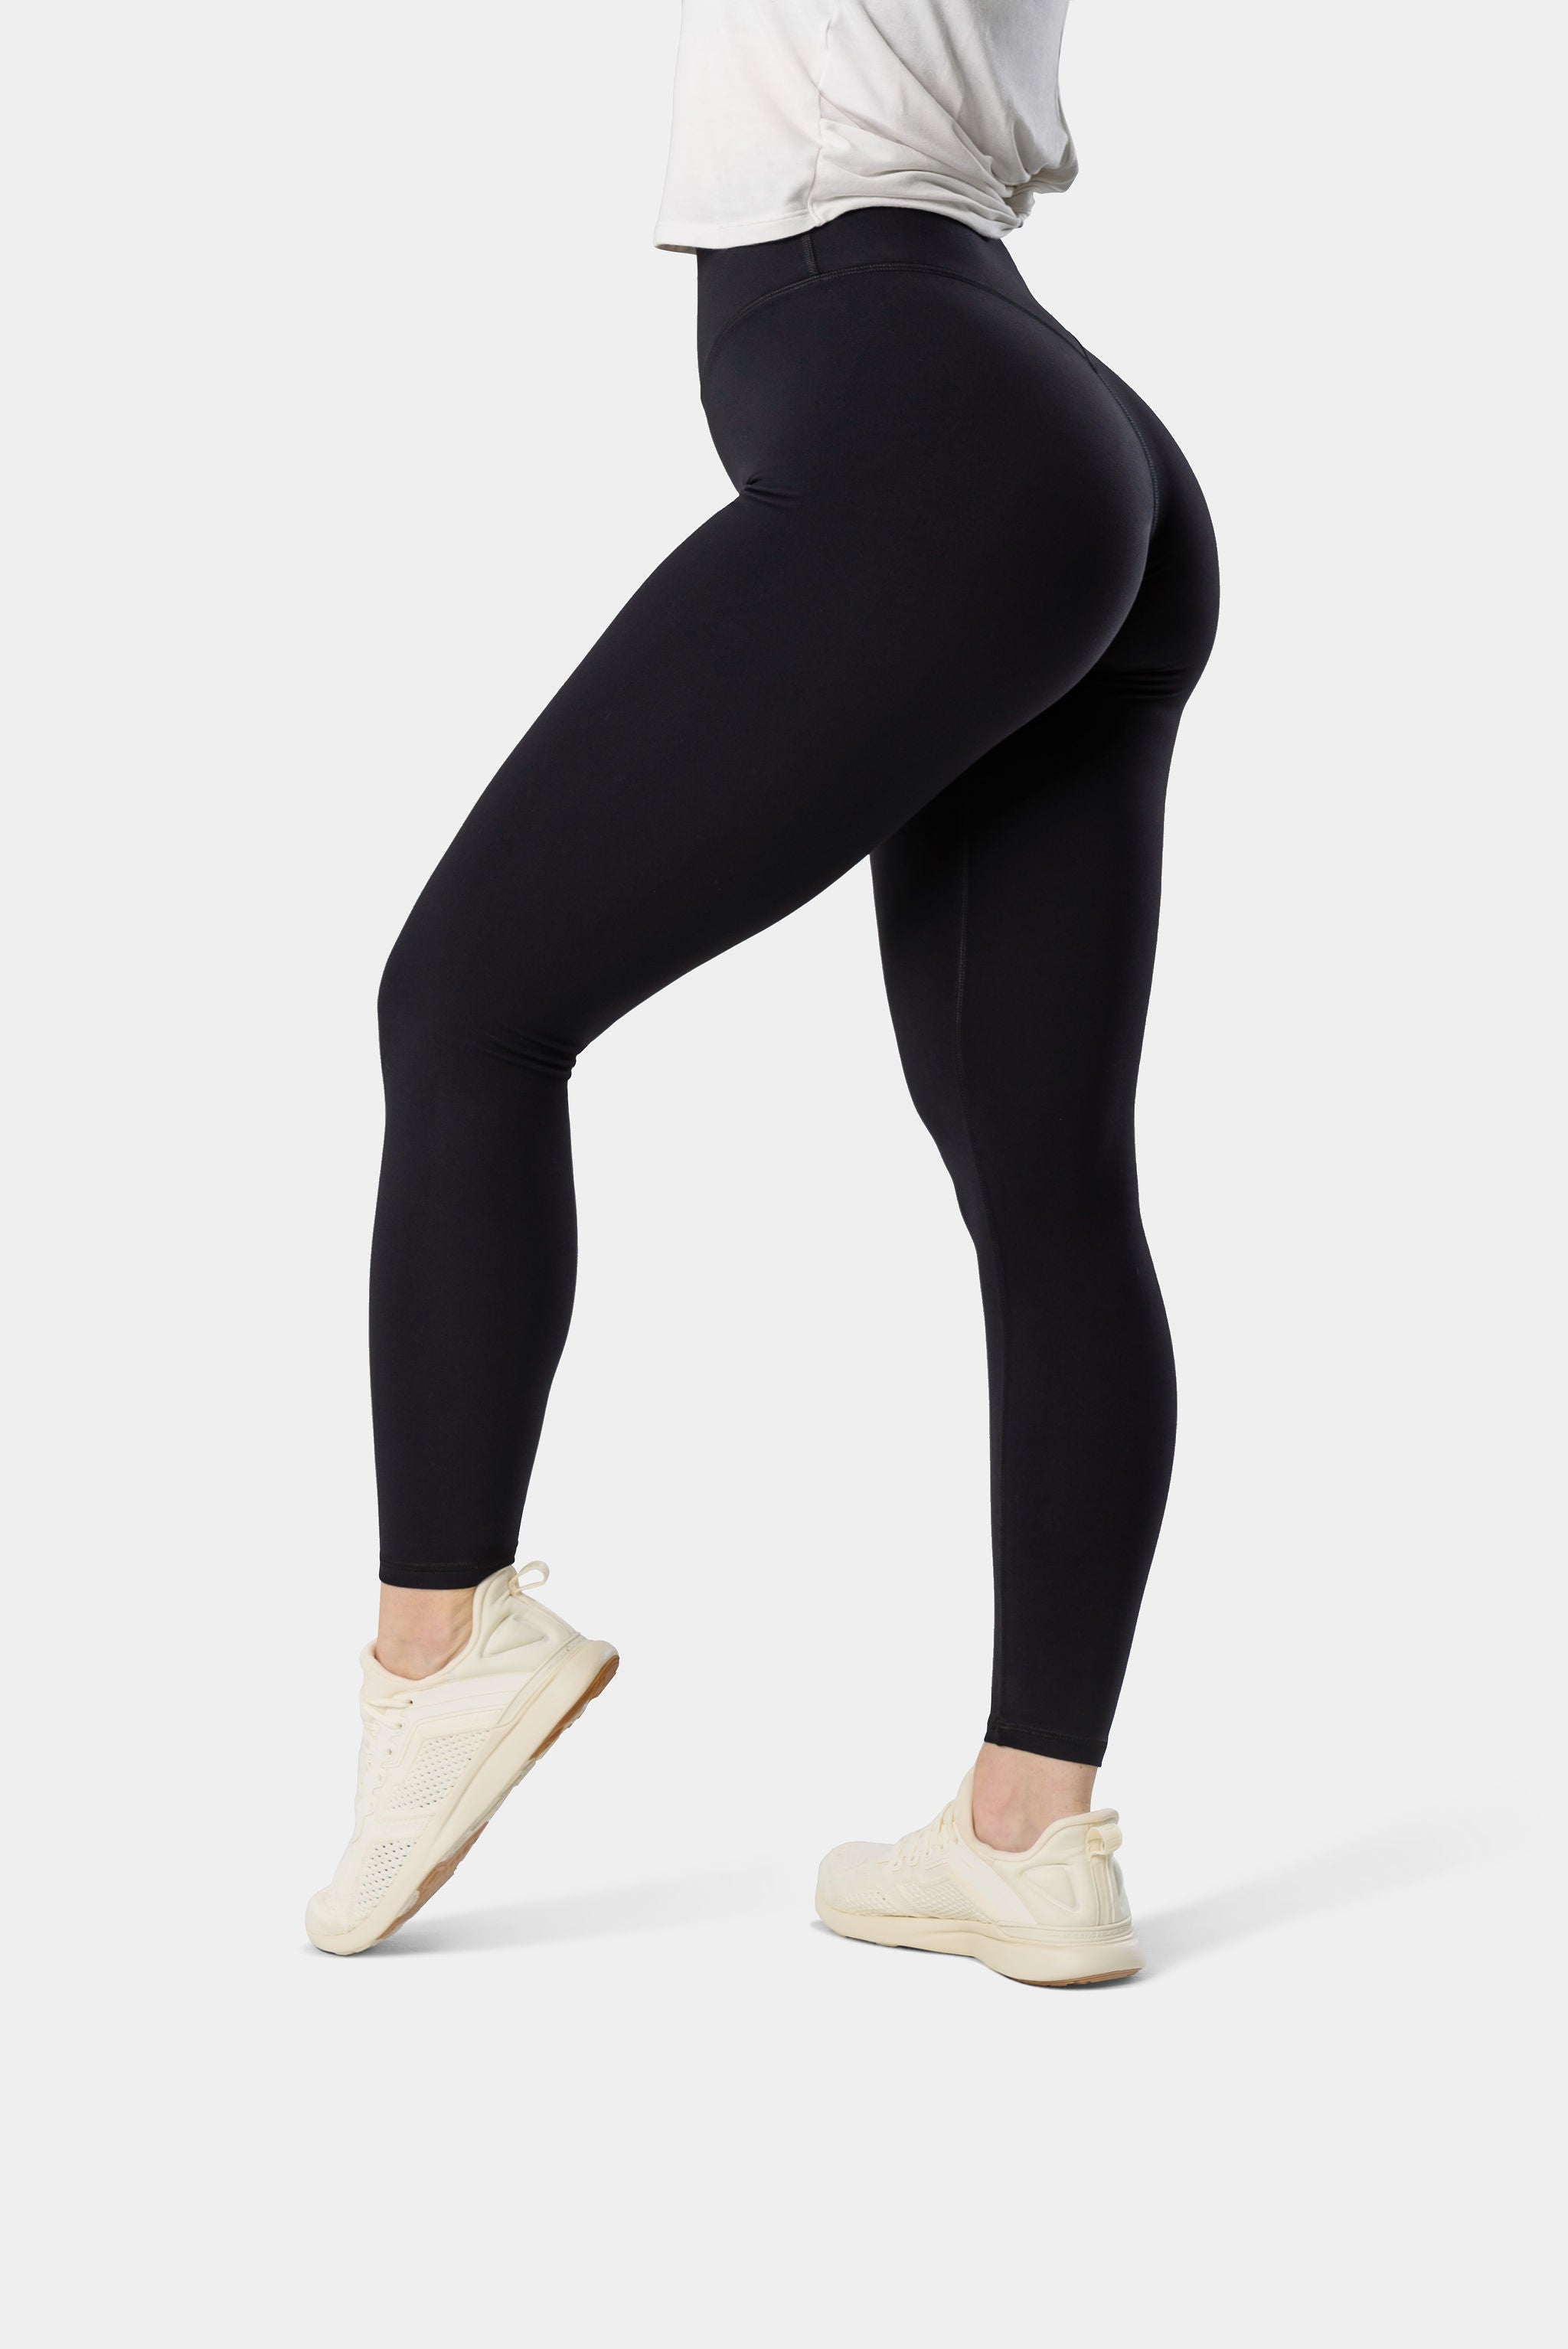 Holiday Savings! Cameland Women's Solid Color Micro Flare High Waist And  Hip Lifting Exercise Fitness Yoga Pants 